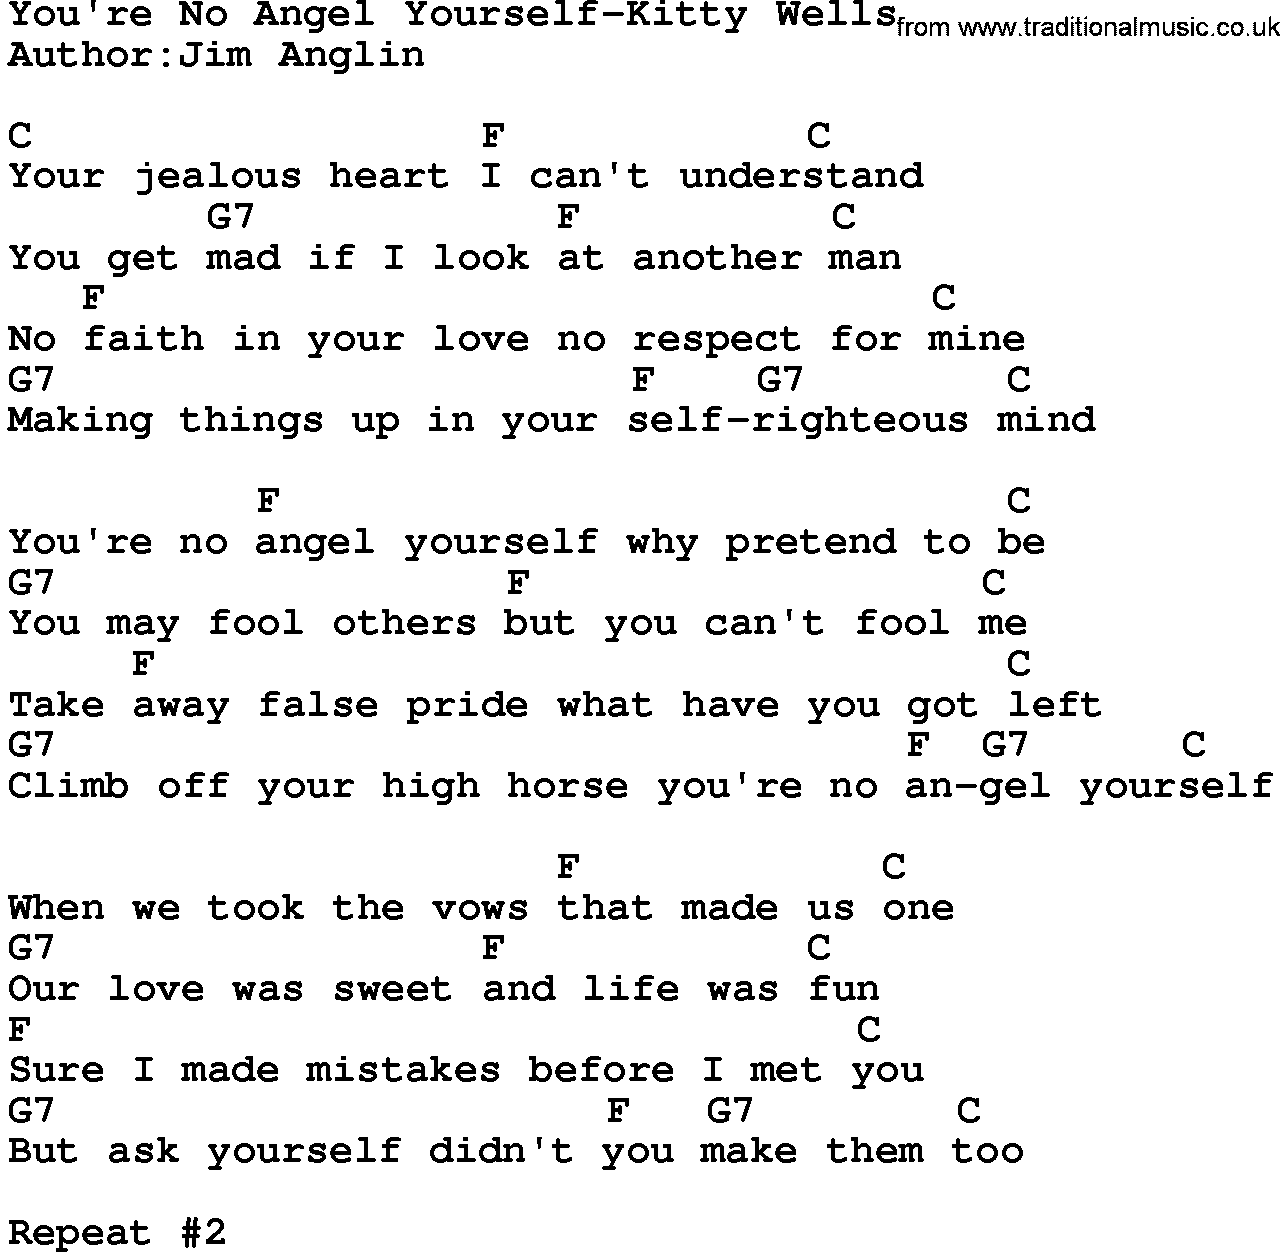 Country music song: You're No Angel Yourself-Kitty Wells lyrics and chords